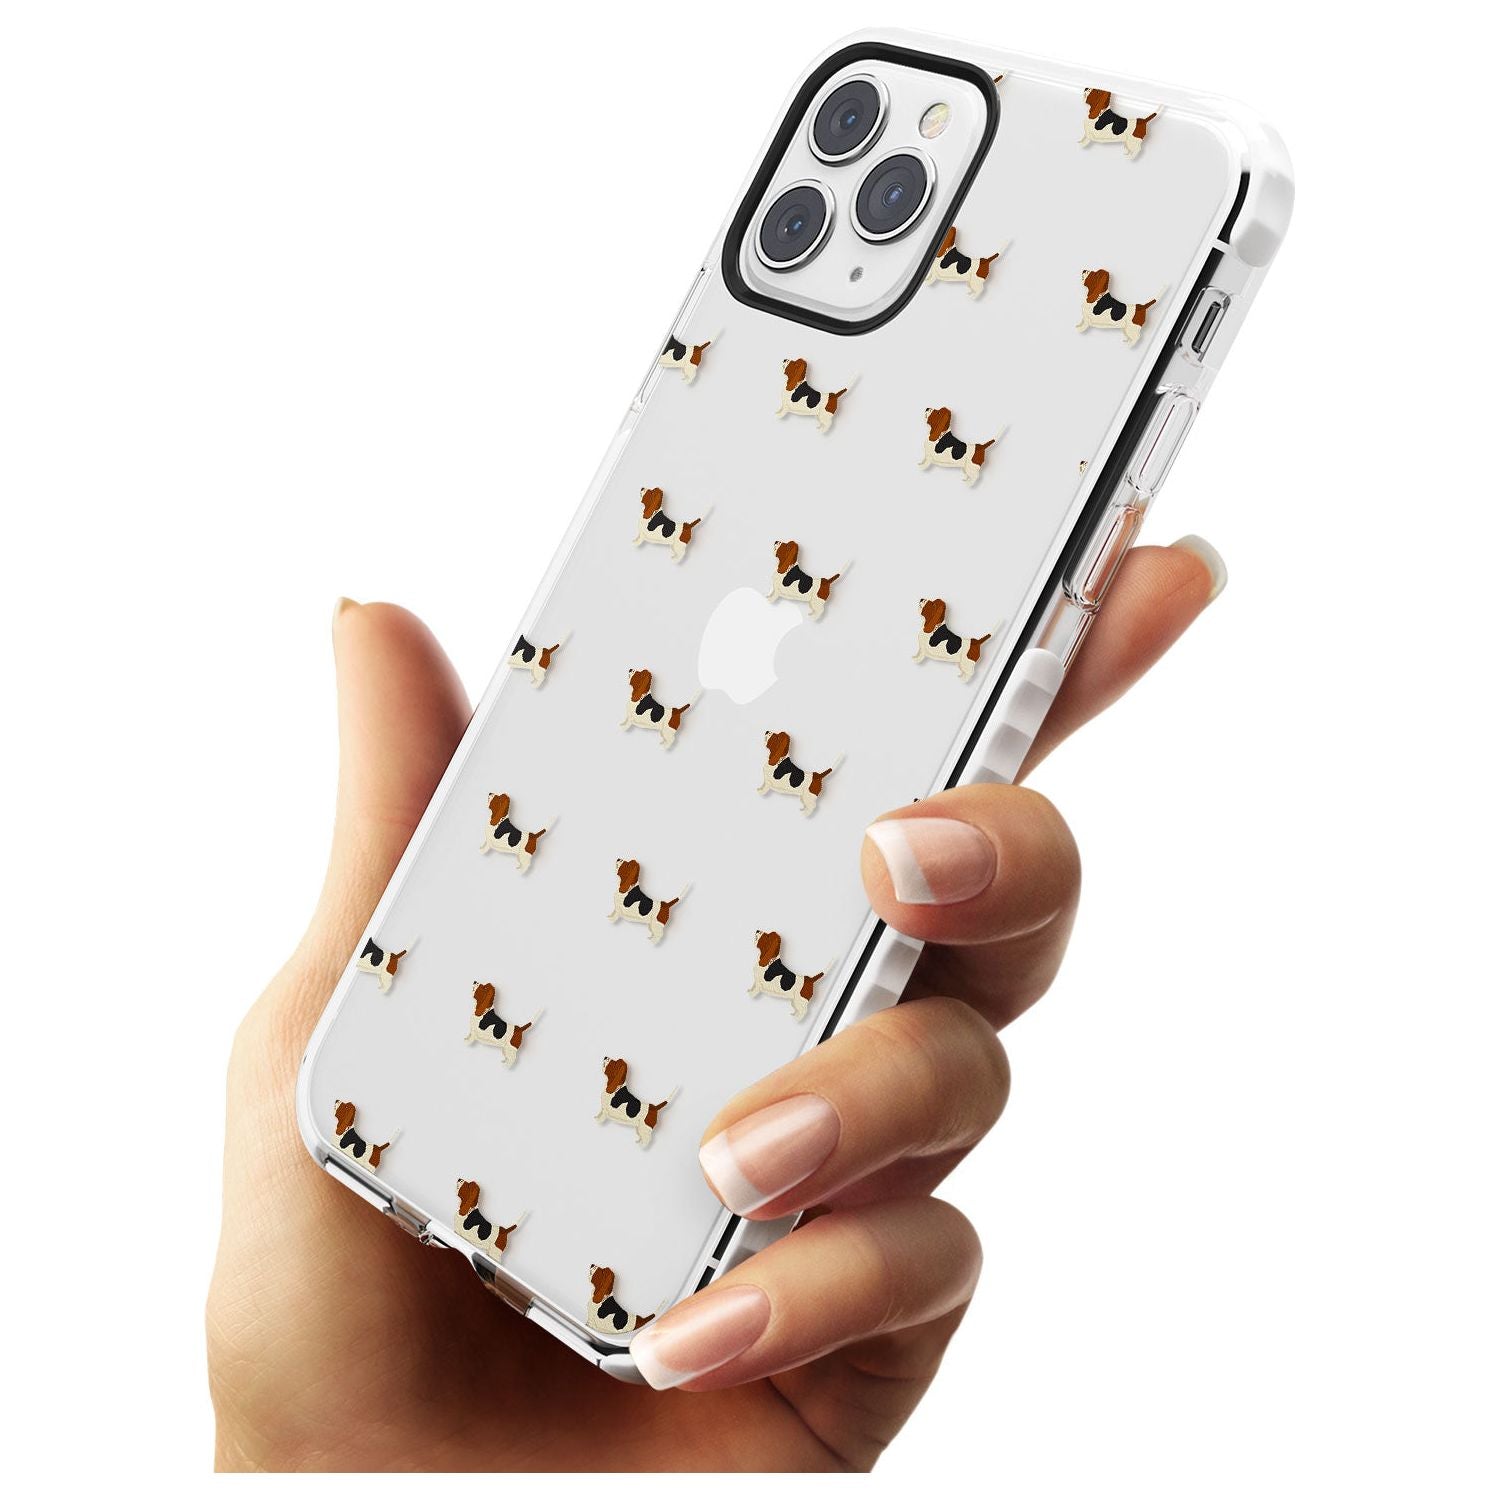 . Basset Hound Dog Pattern Clear Impact Phone Case for iPhone 11 Pro Max